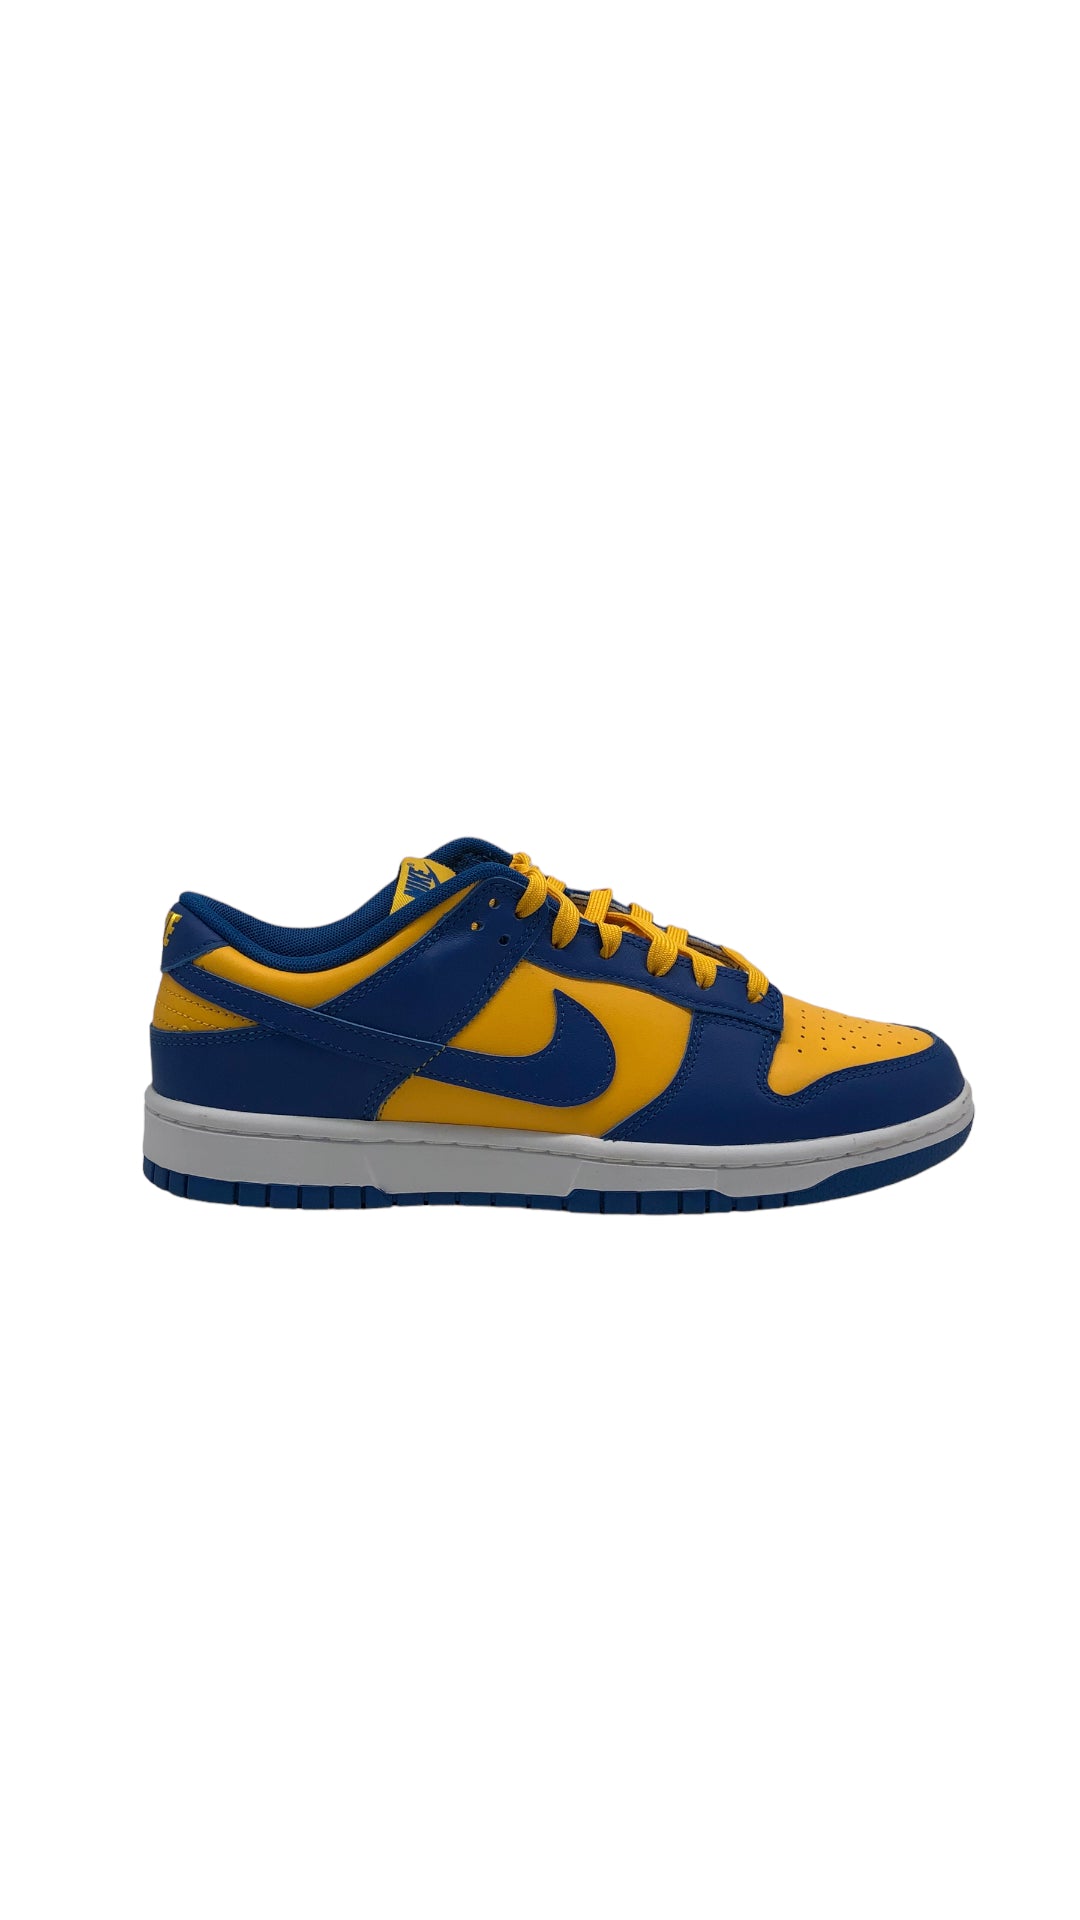 Pre-Owned Nike Dunk Low "UCLA" Sz 9M/10.5W